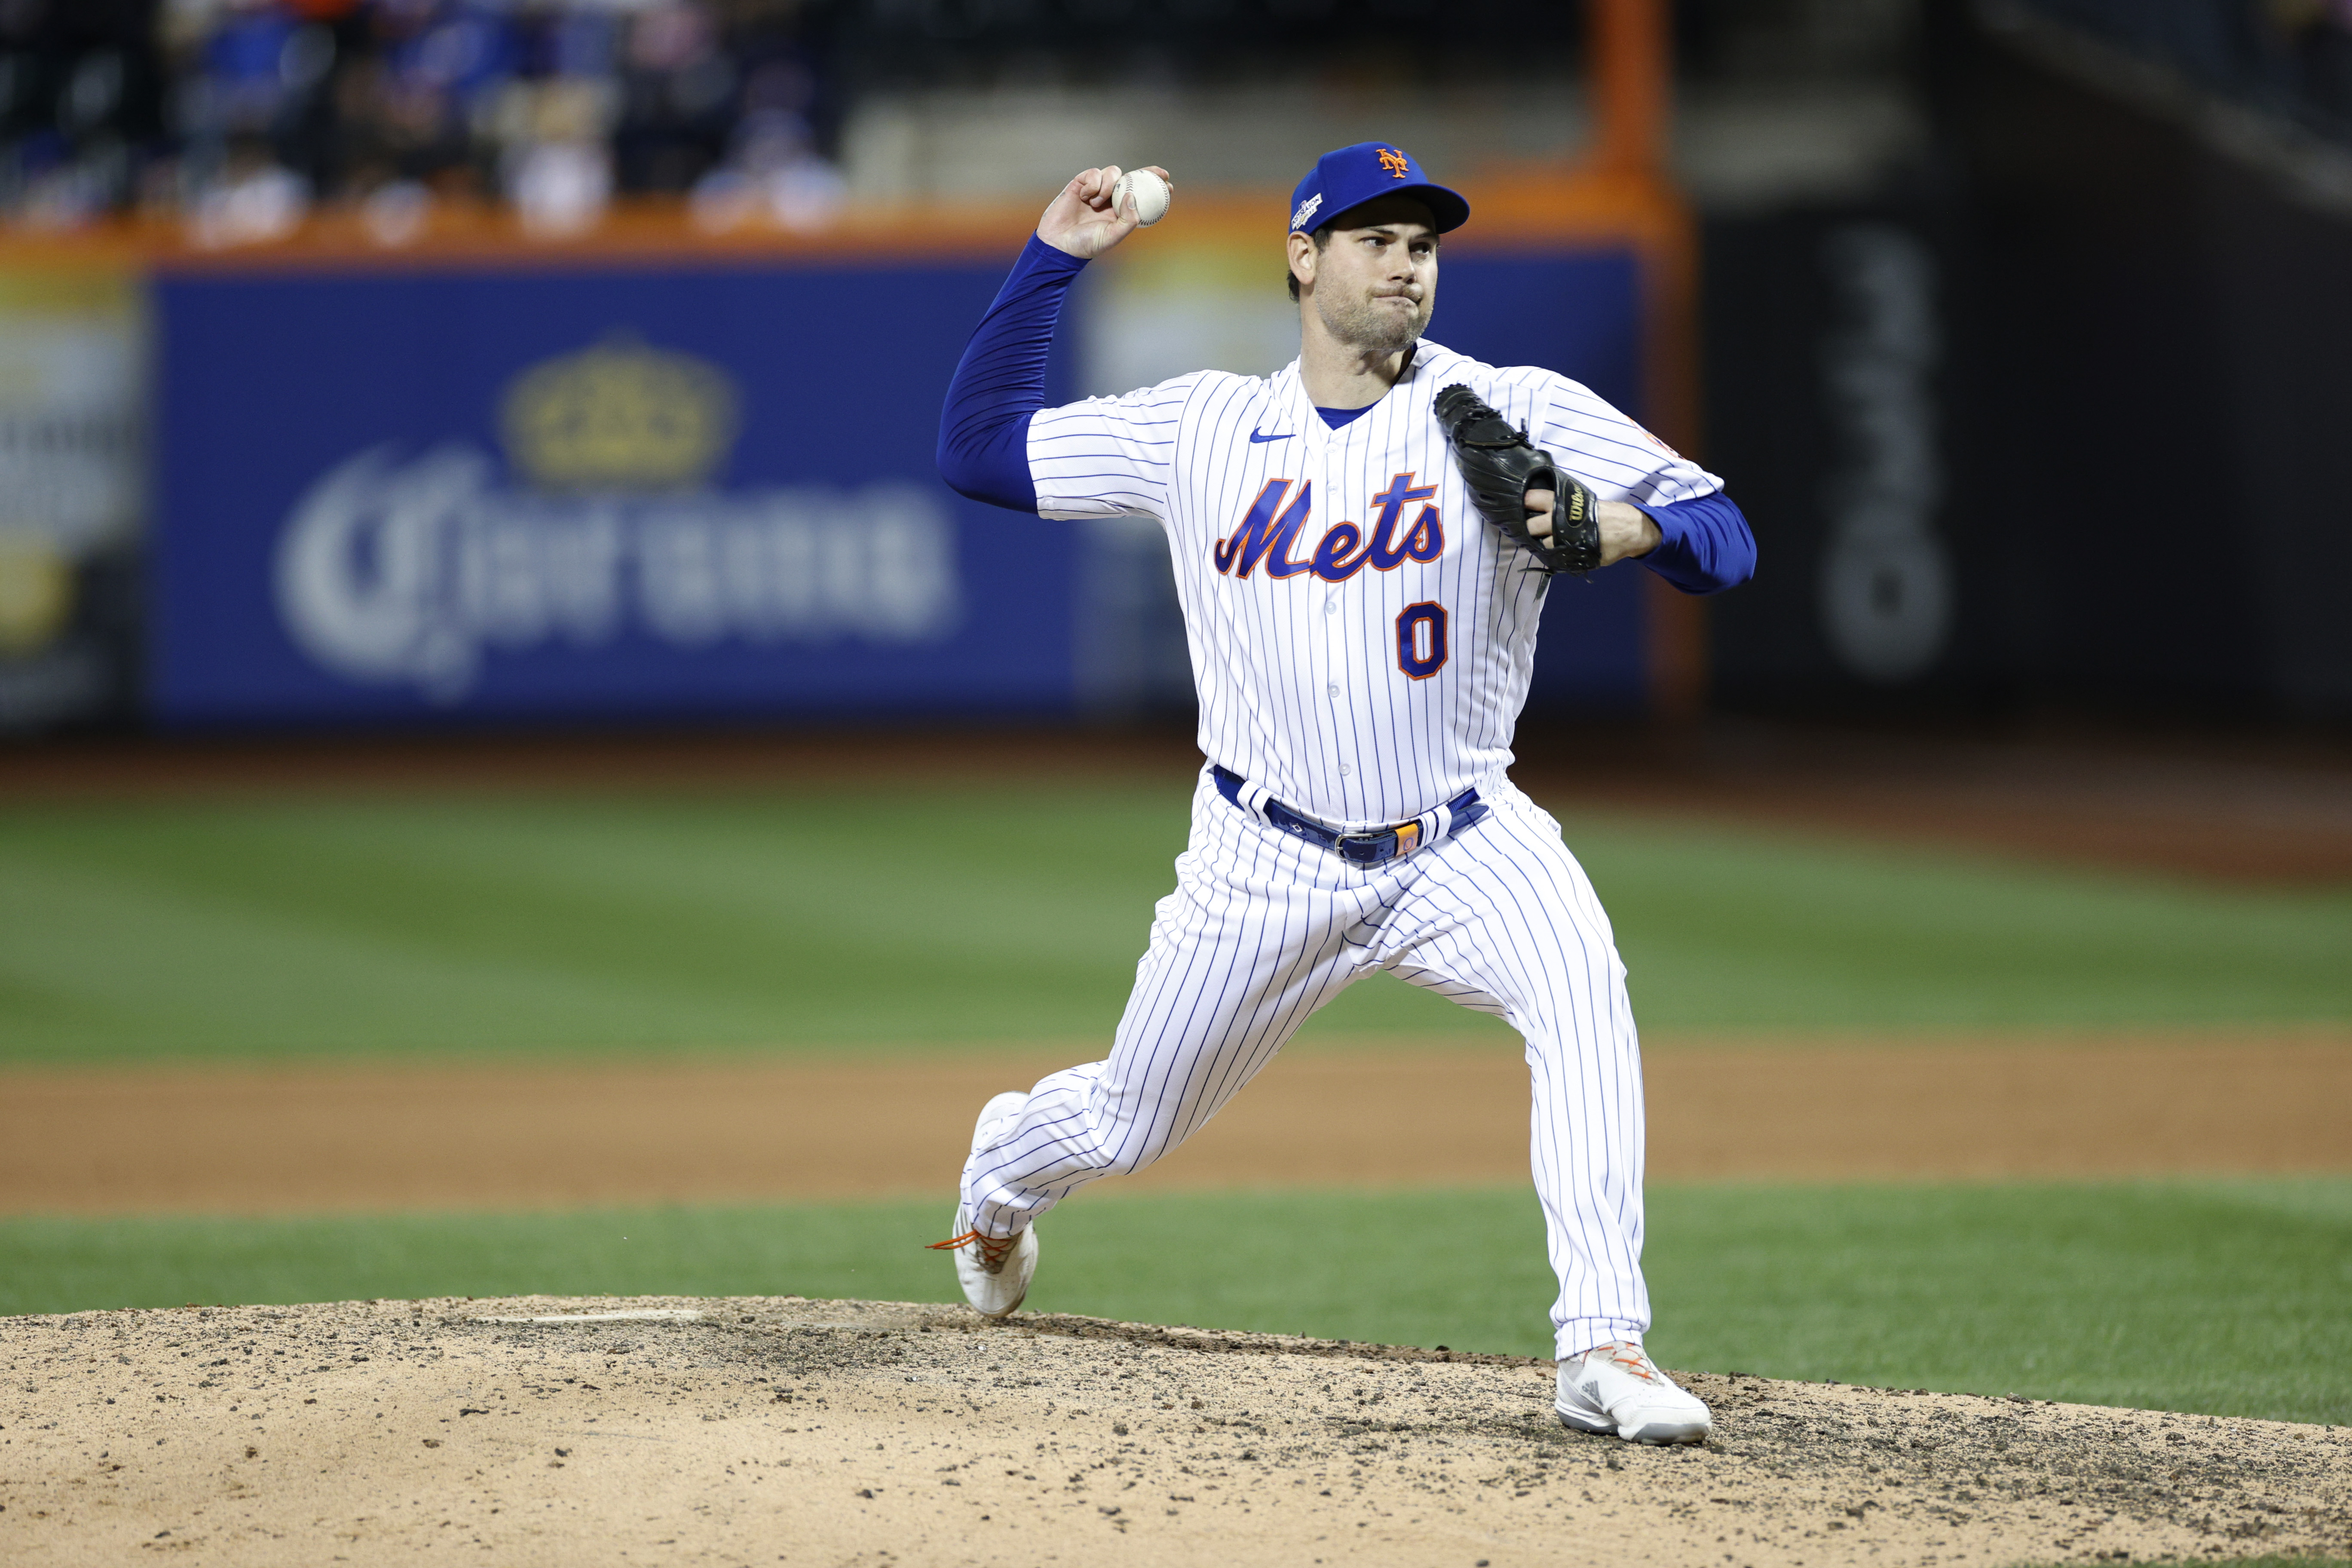 Adam Ottavino pitching demo: how the Mets reliever gets a grip and delivers, Mets Hot Stove